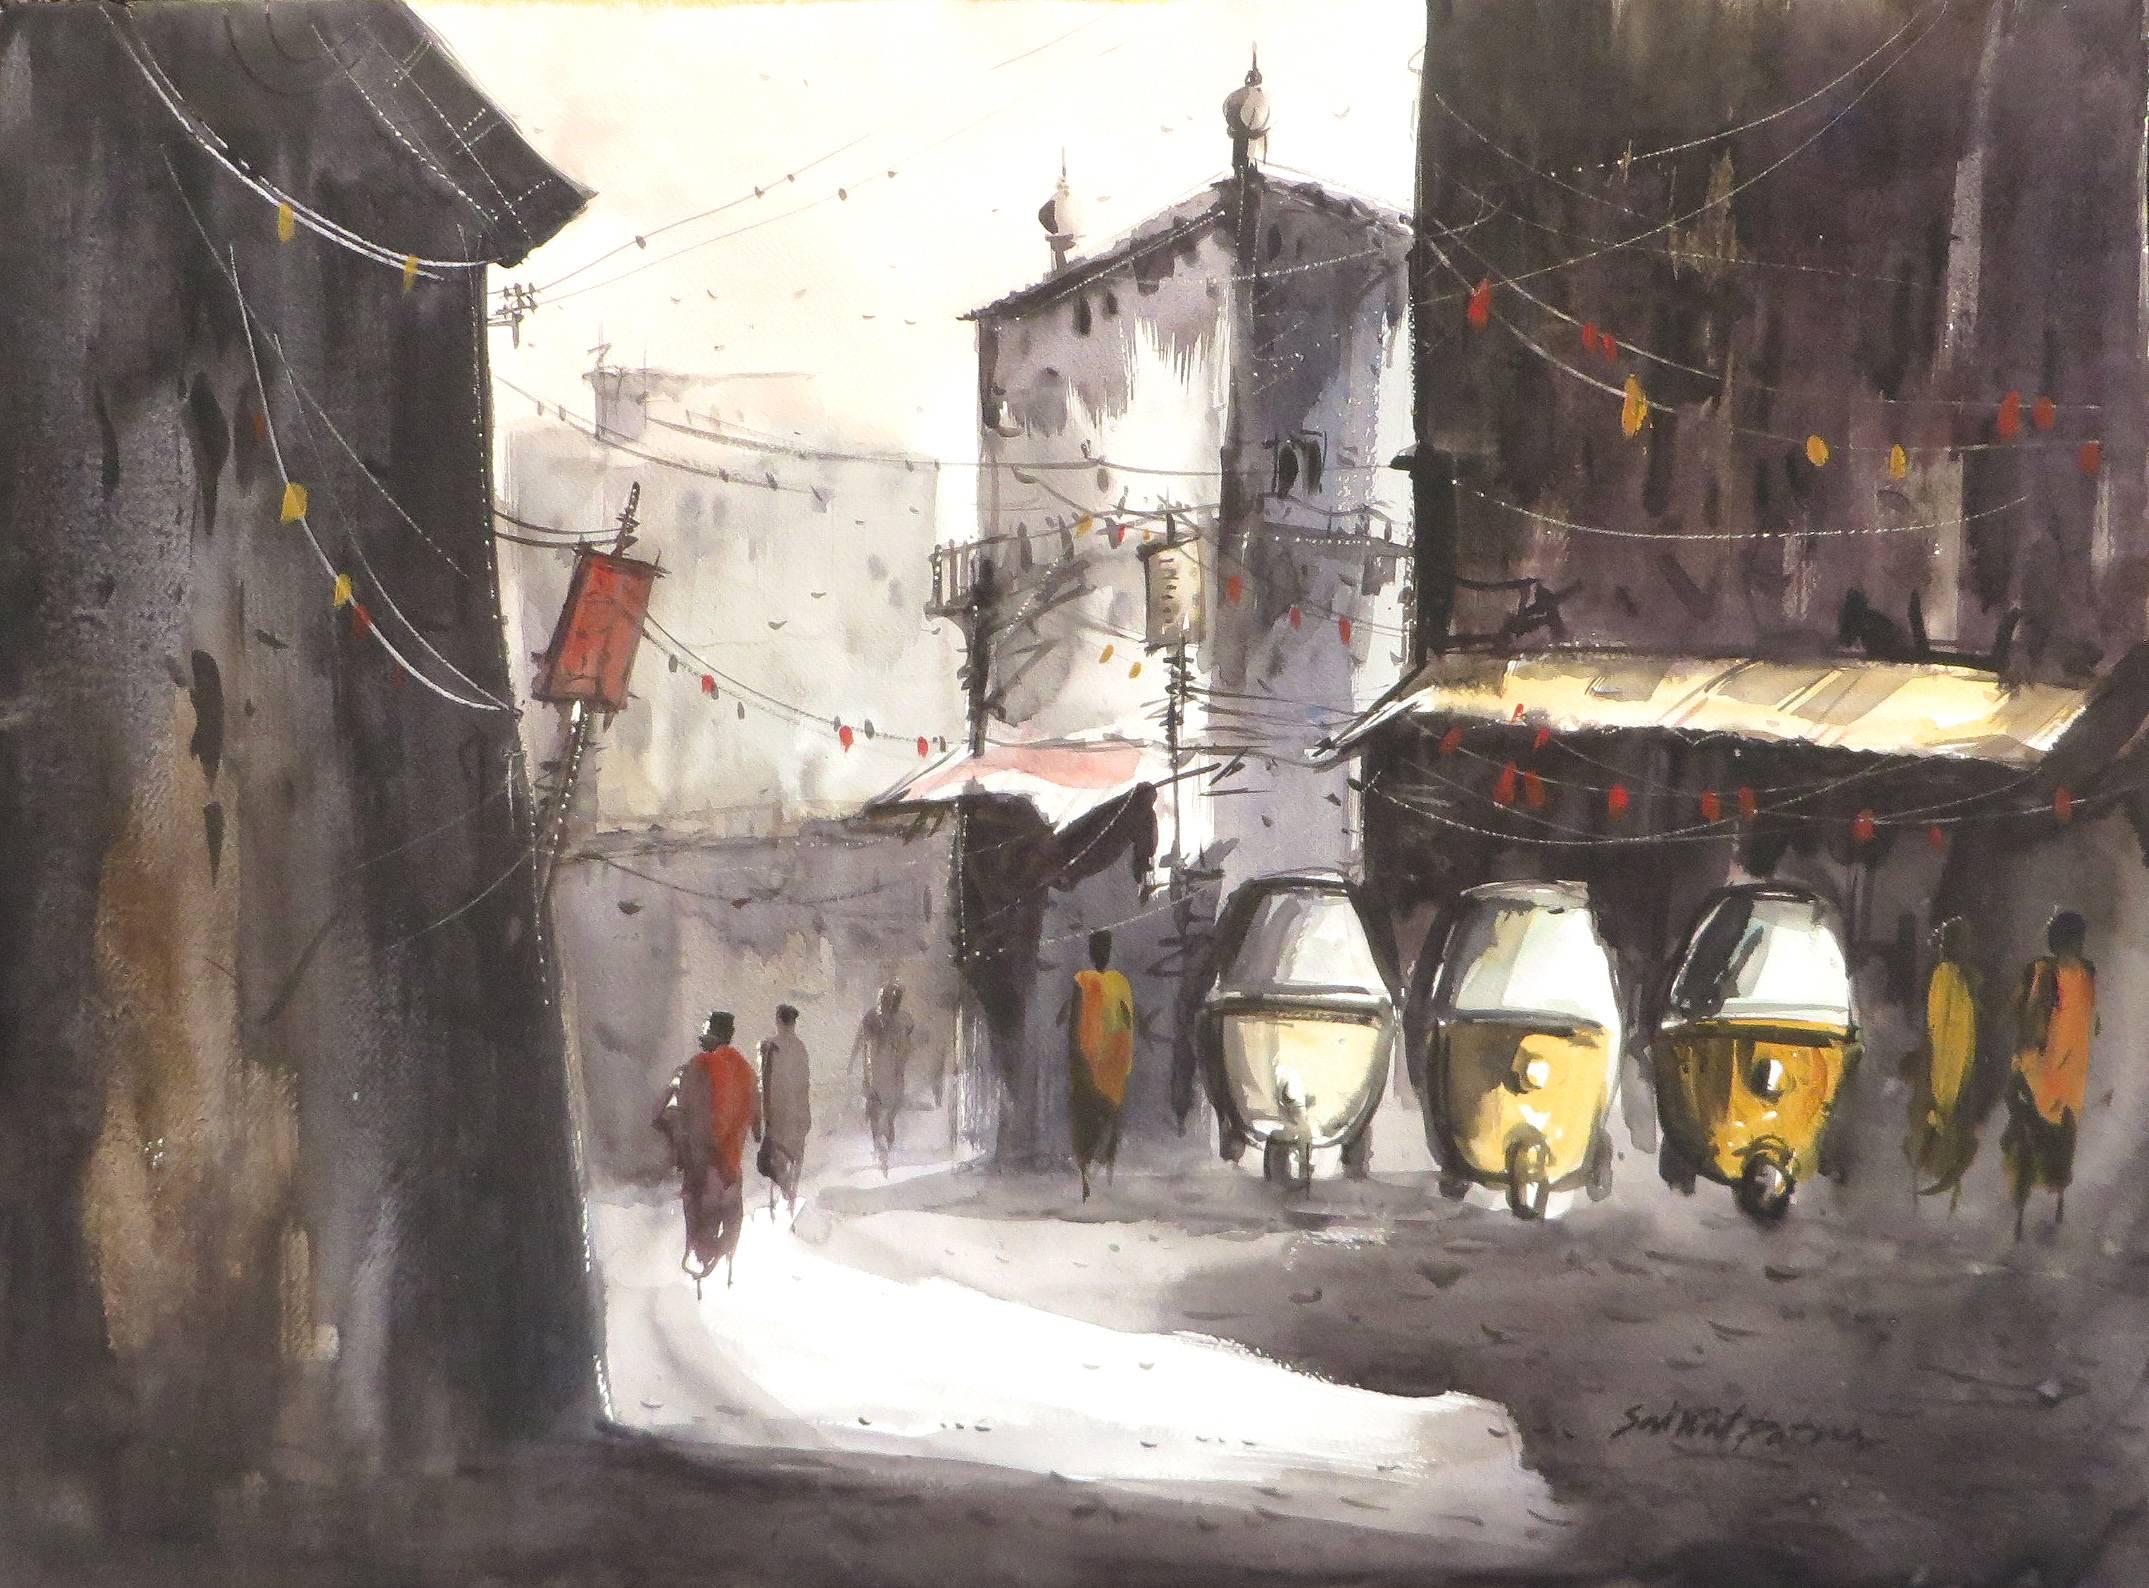 Cityscape, Autorickshaw, Watercolor on Paper by Indian Artist "In Stock"